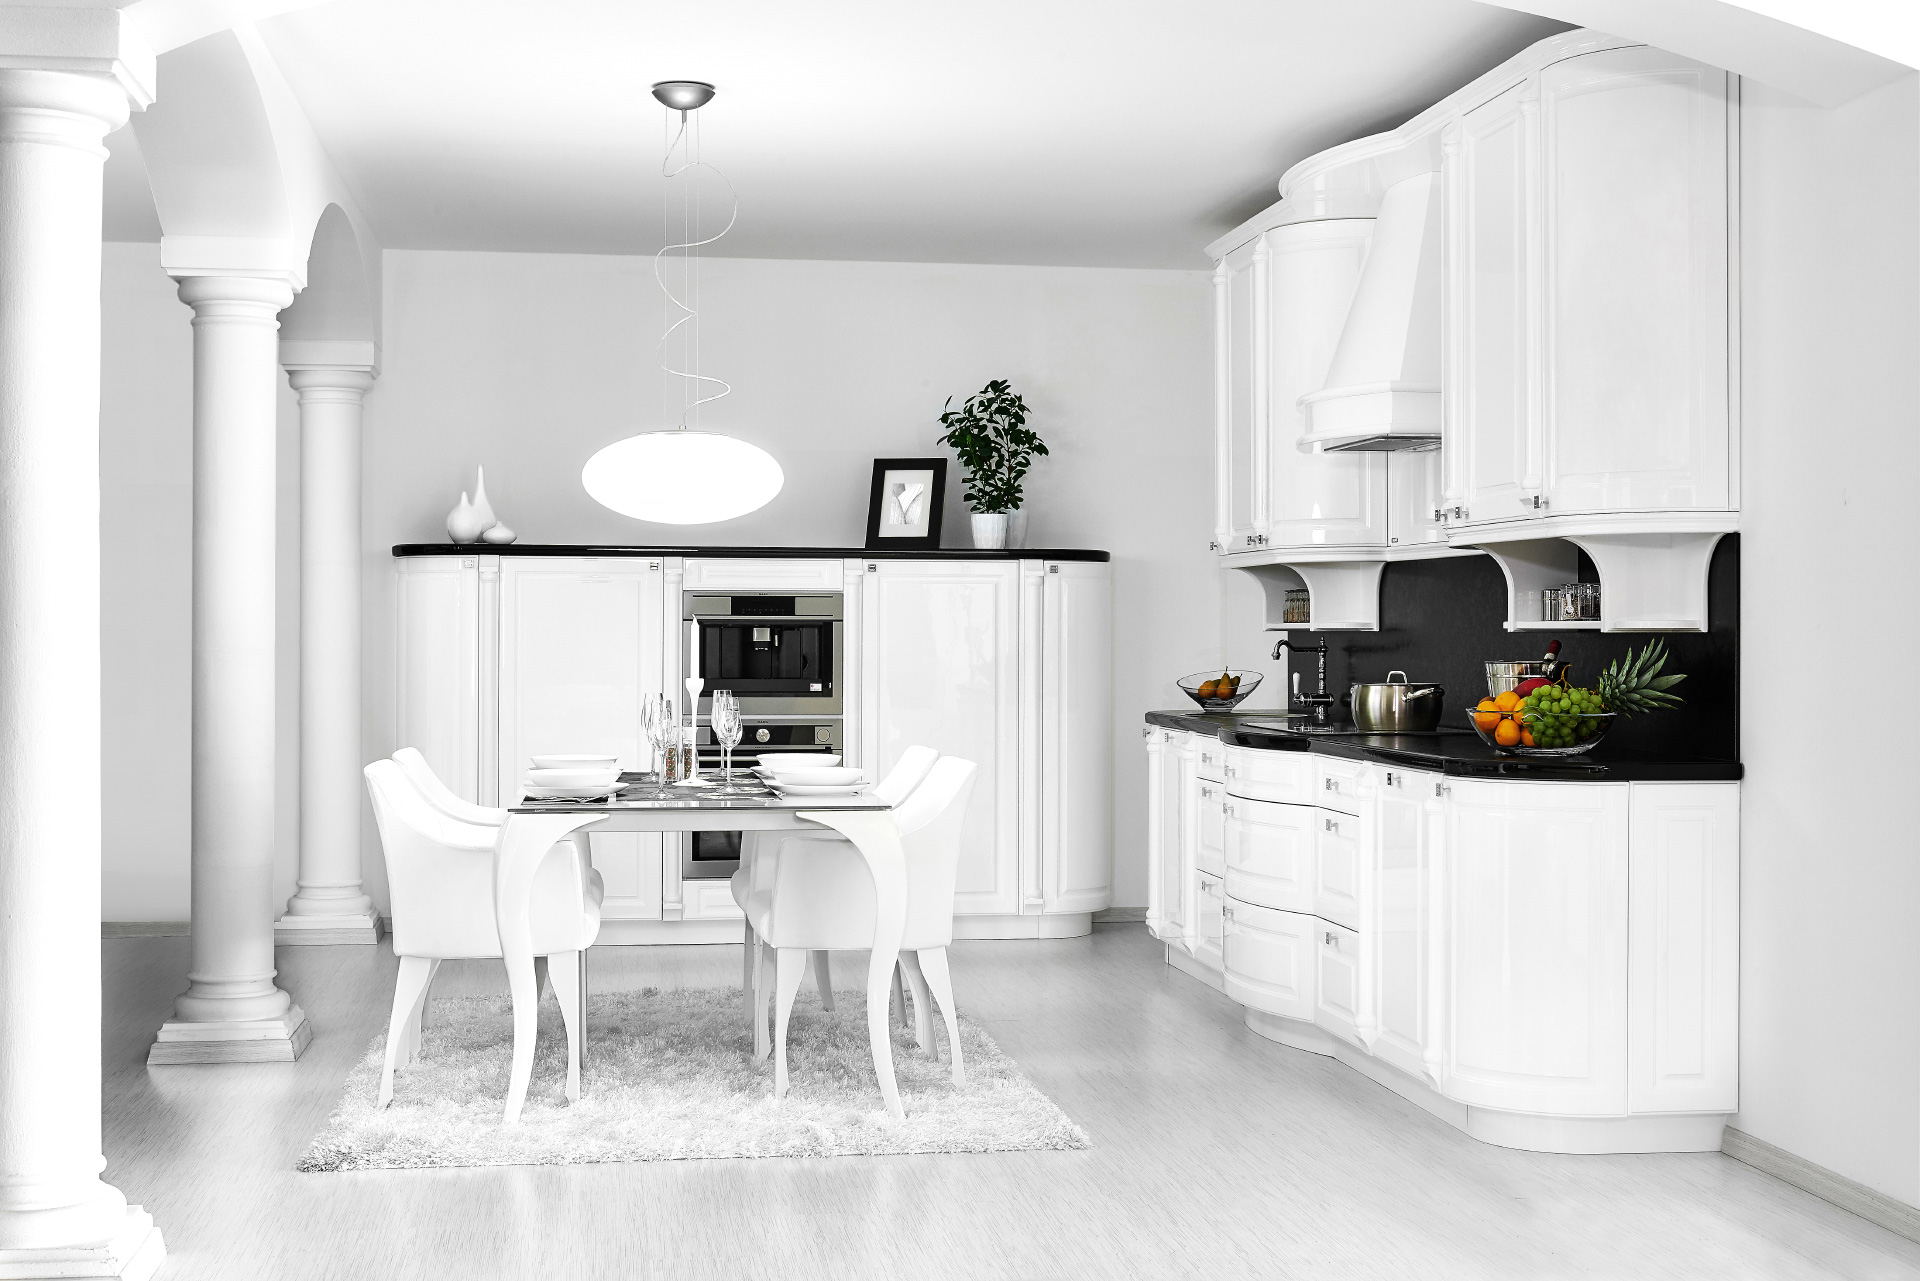 Rustic Hanák kitchen in white gloss combined with a black worktop.